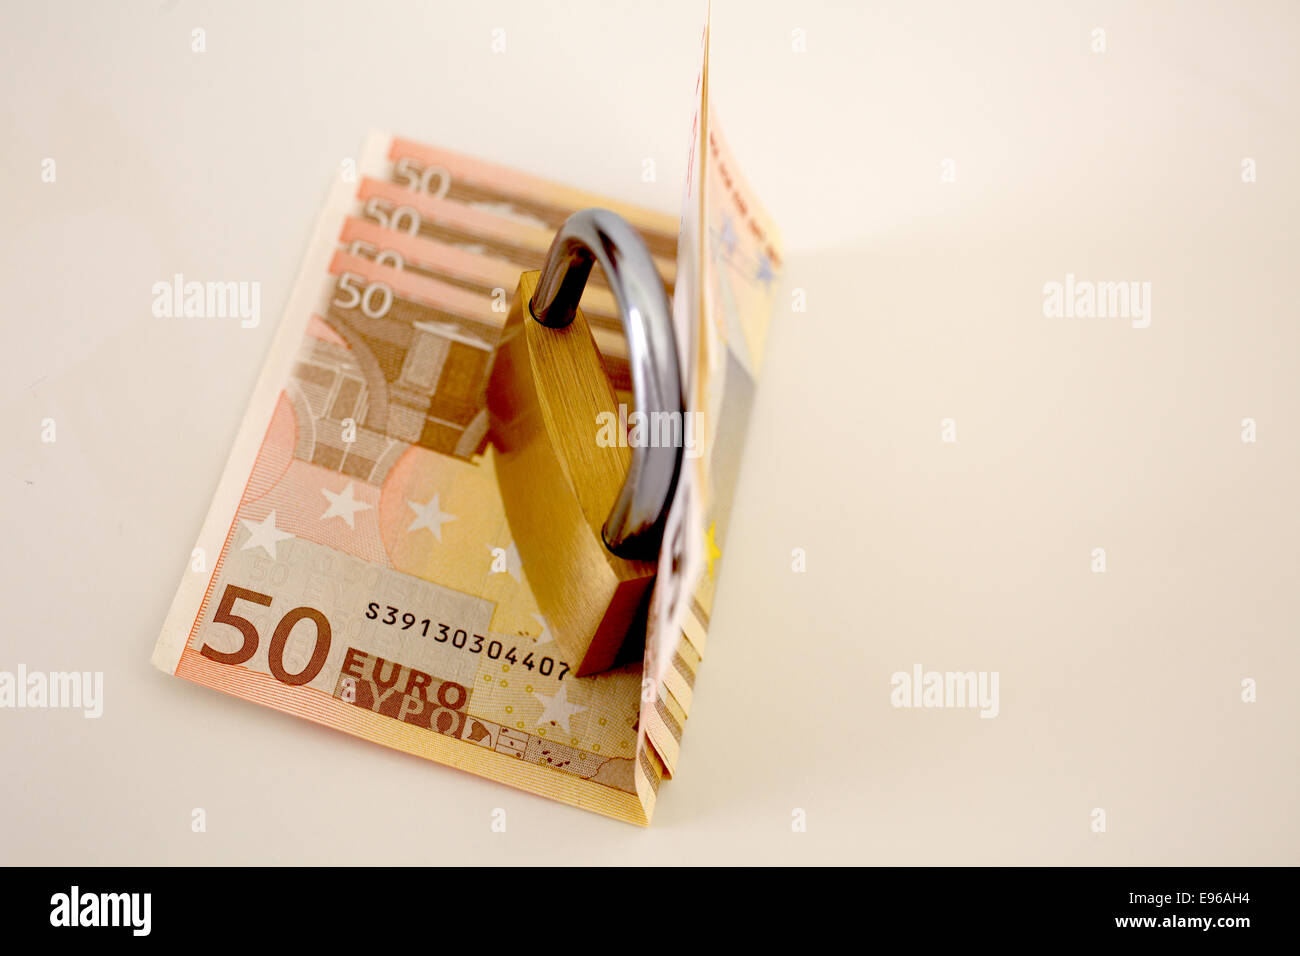 Euro currency cash with padlock isolated on a white background concept locked financial security Stock Photo